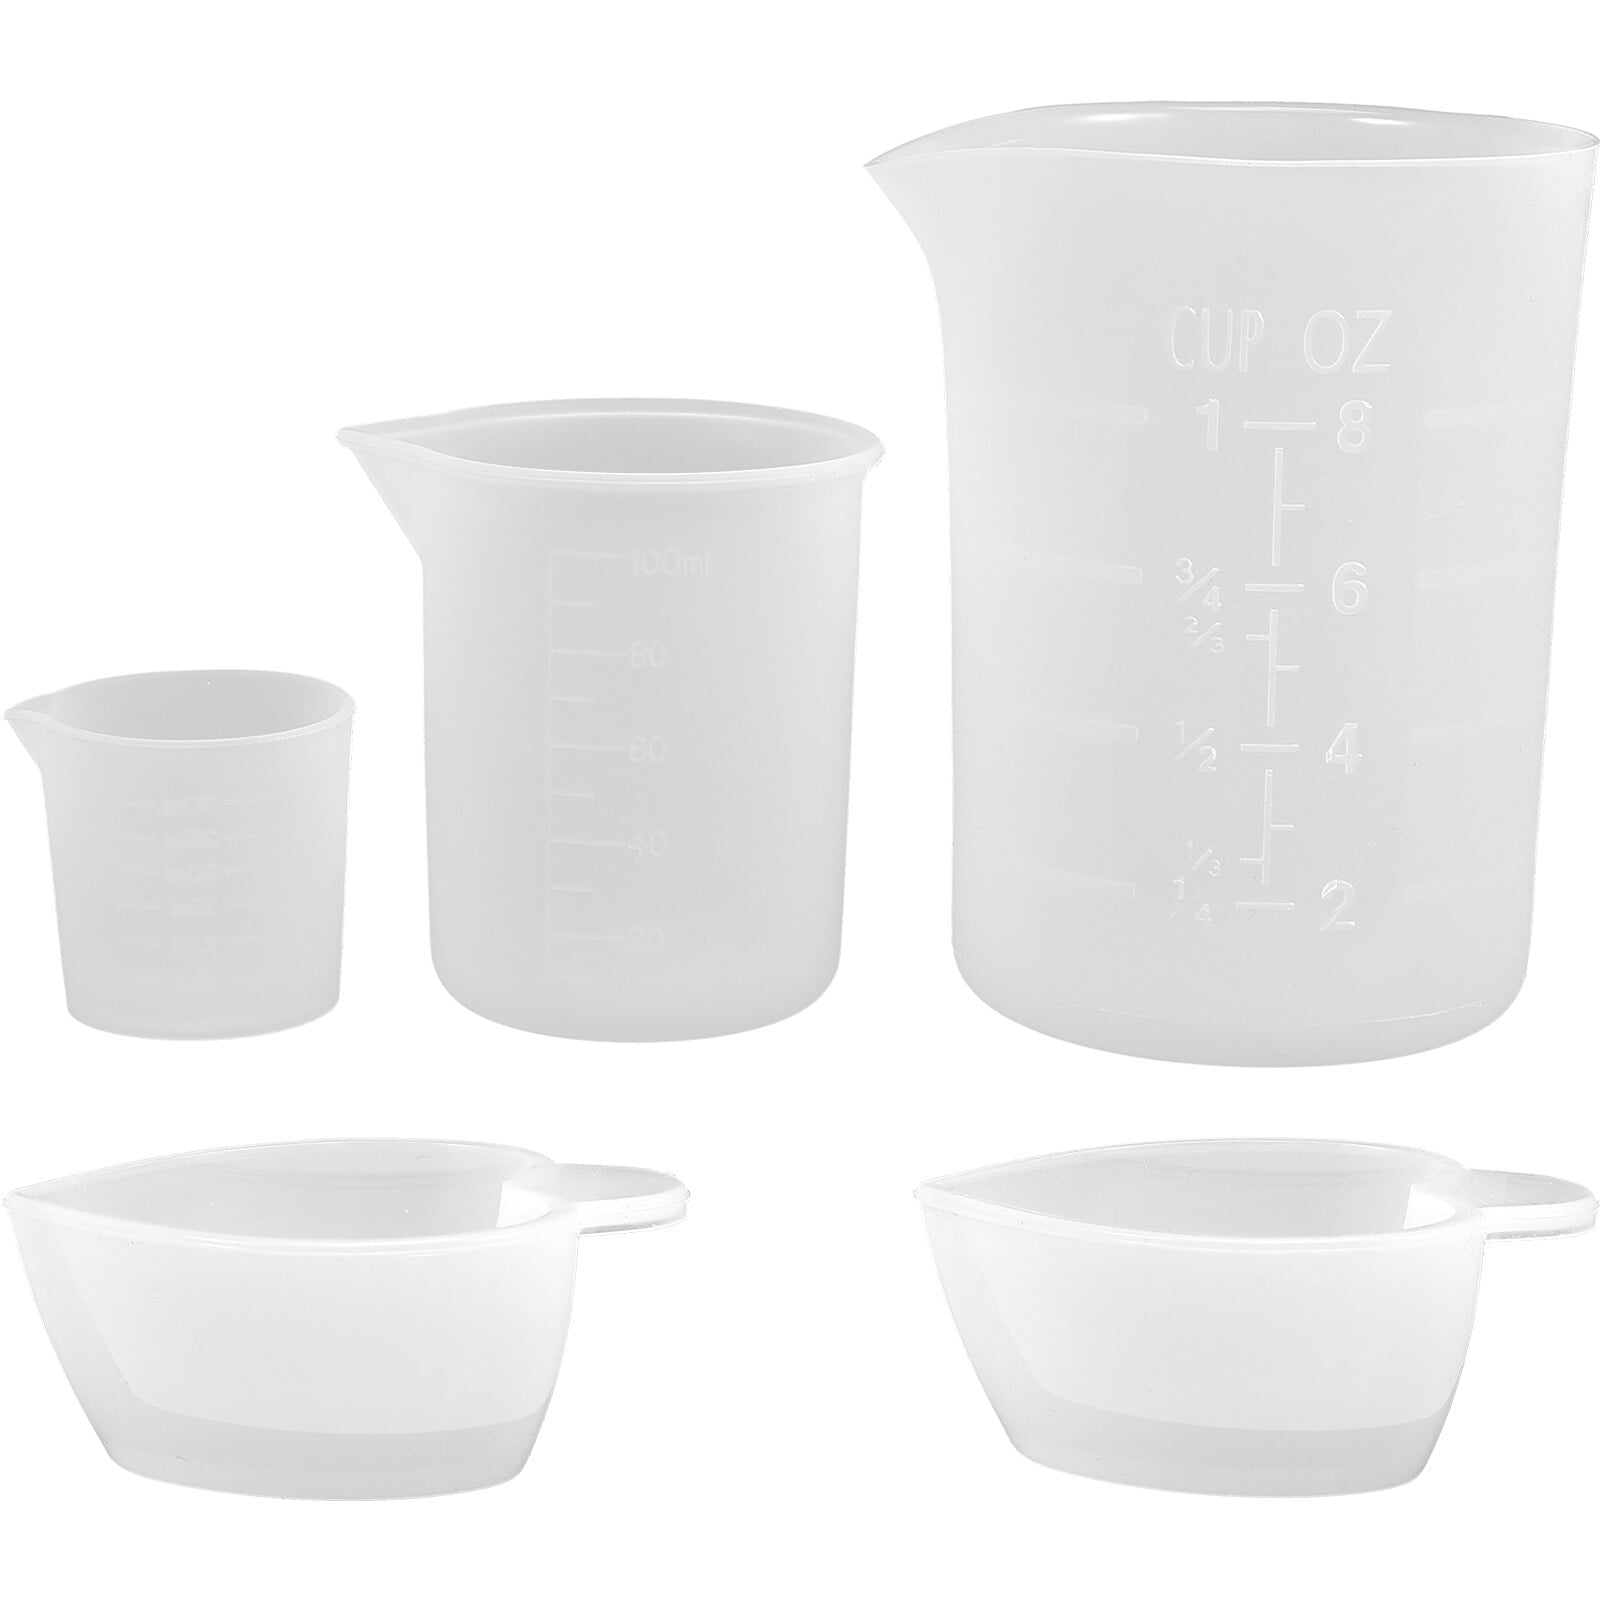 Silicone Measuring Cups Measures Jugs, 250ml Resin Mixing Cups with Scale  for Kitchen, Cooking, Baking, Epoxy Resin, Casting Molds